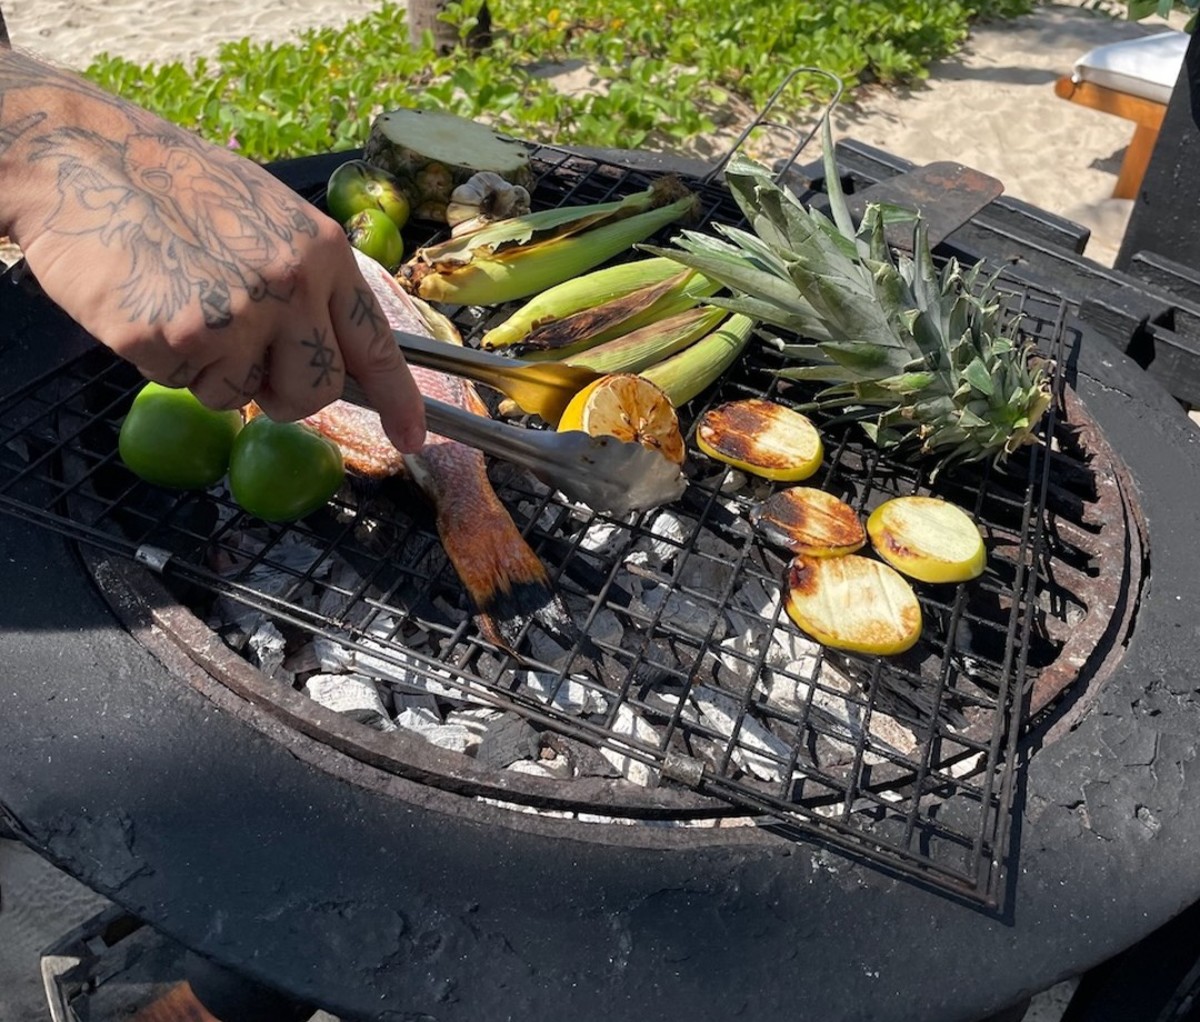 Exectutive chef Javier Garcia Cerrillo uses a wood-fueled grill.